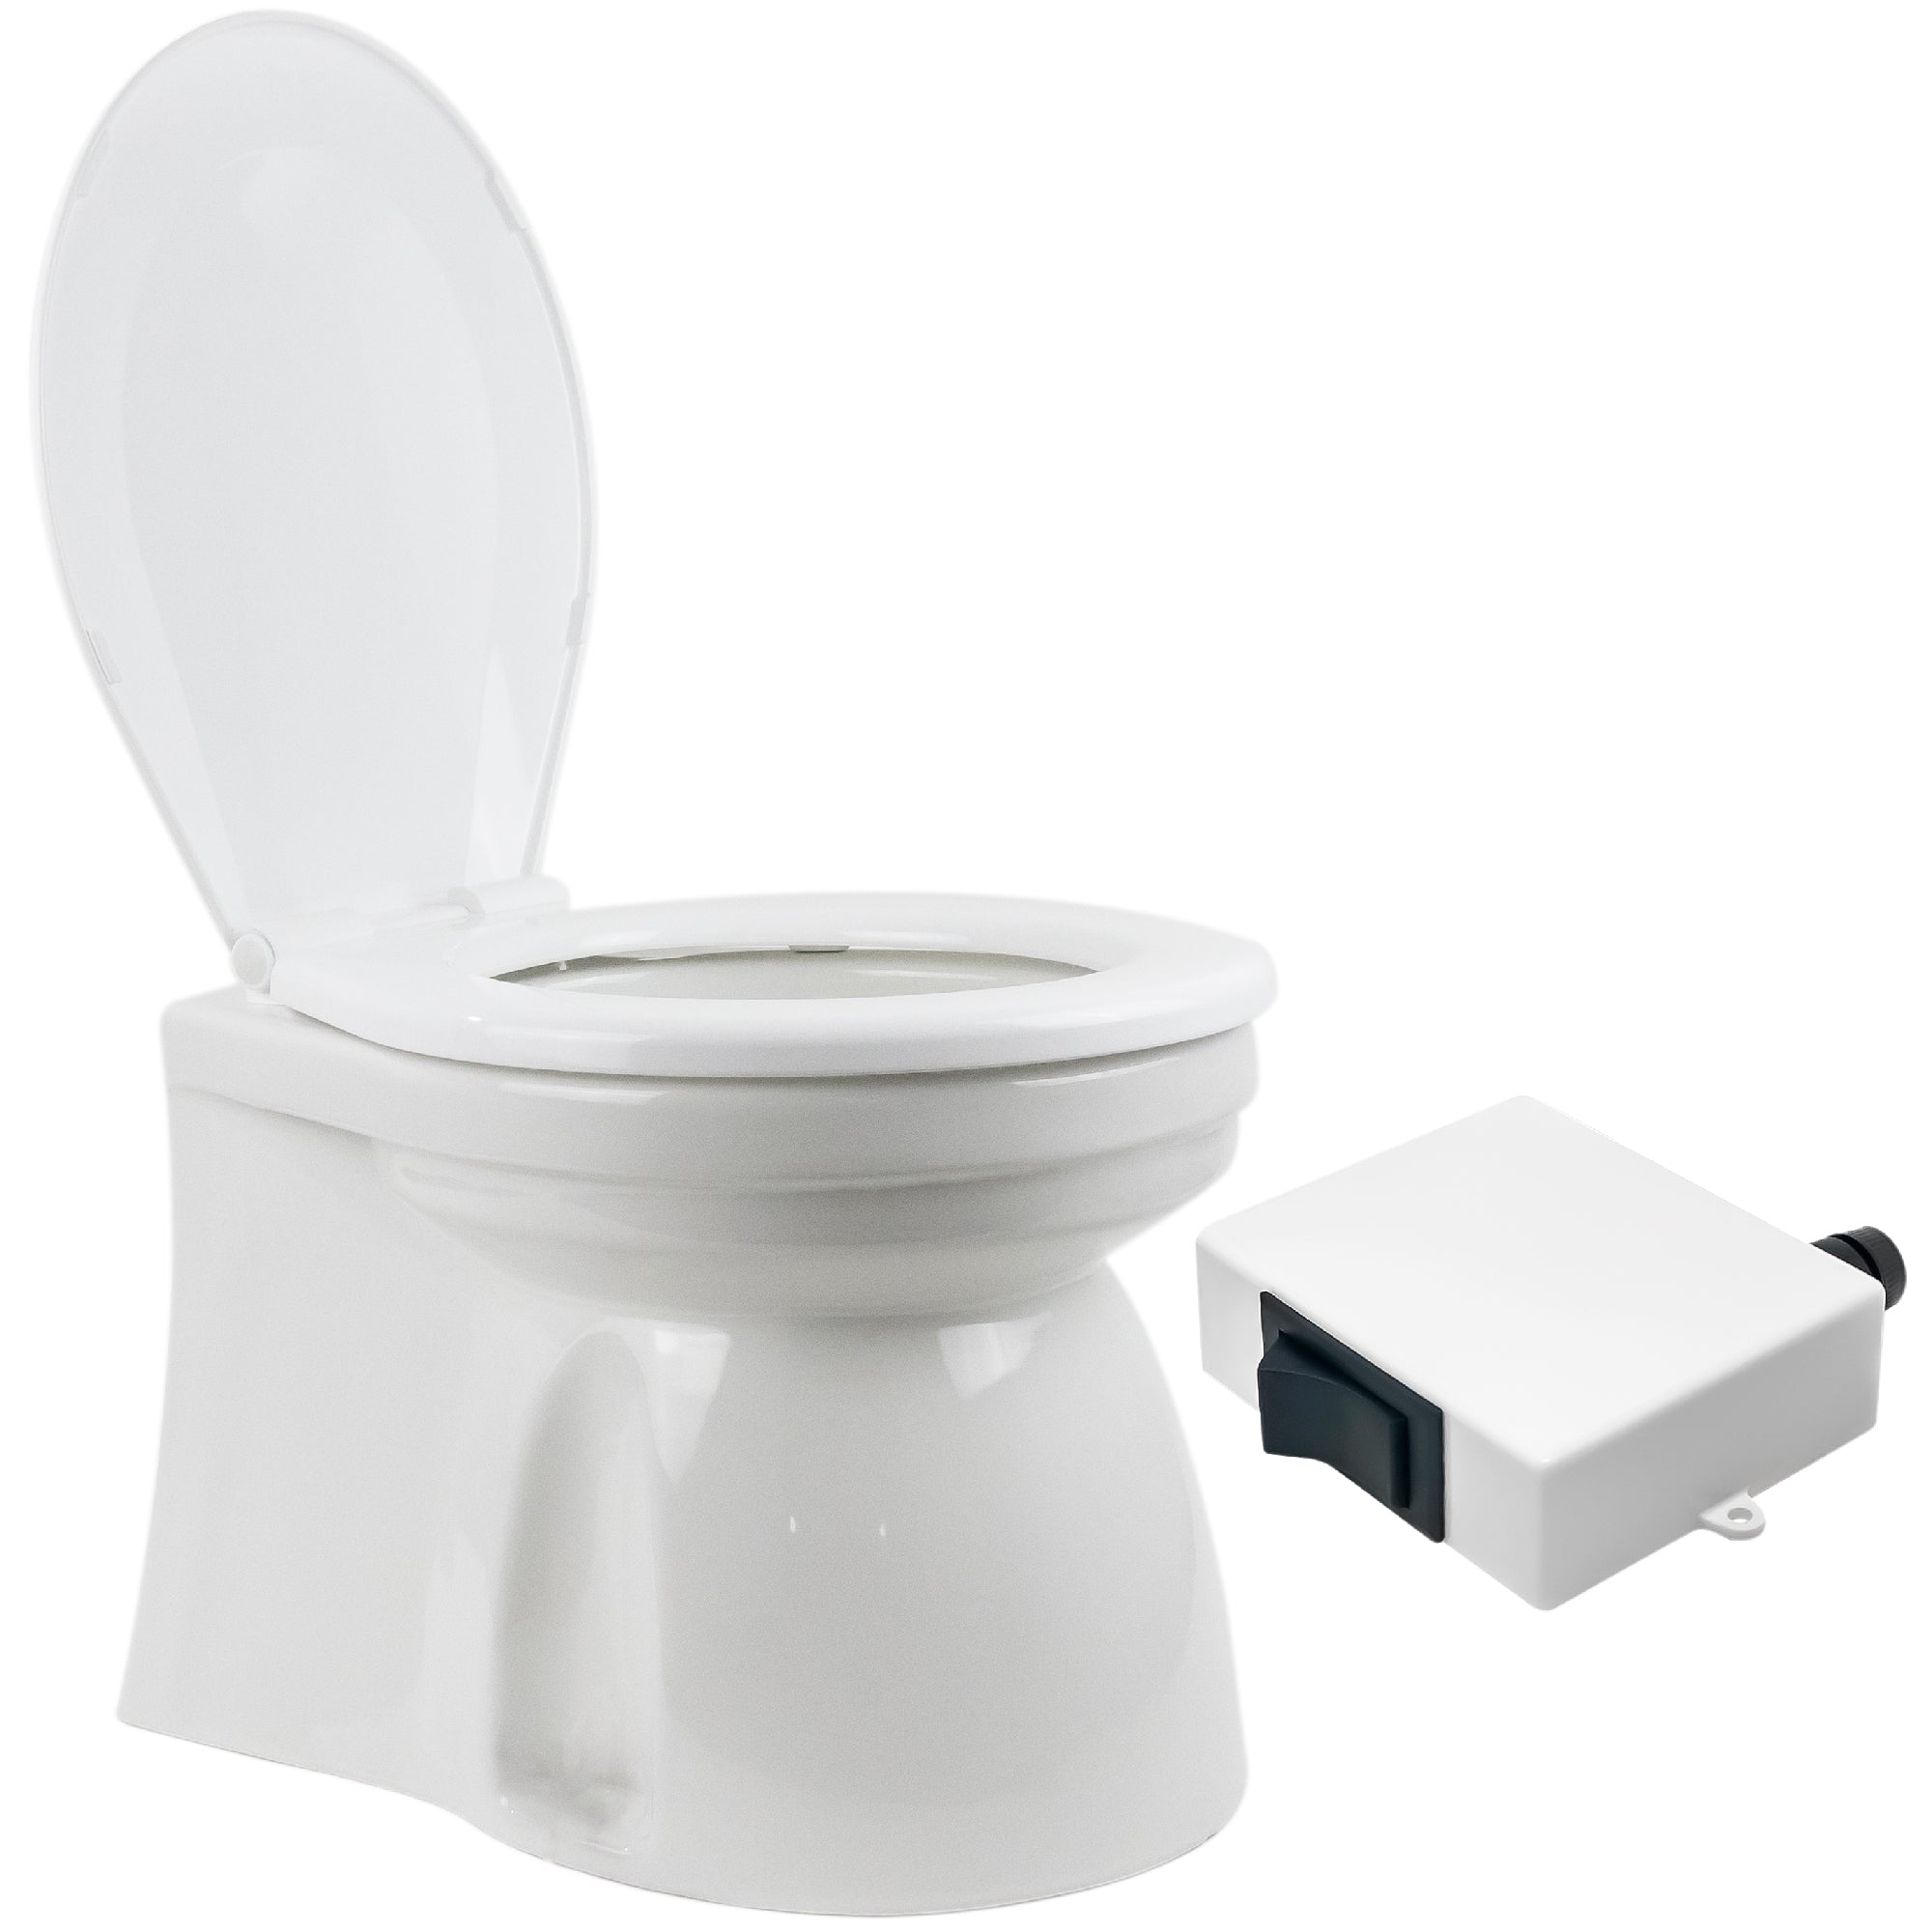 TMC Electric Marine Toilet, RV Toilet with Clamp-On Hose Connection Boat Toilet, Compact Design Bowl, Household Style Heavy-Duty Macerator Pump, On-Off Flush Control, Quiet Soft-Close Lid 12V - FO1600